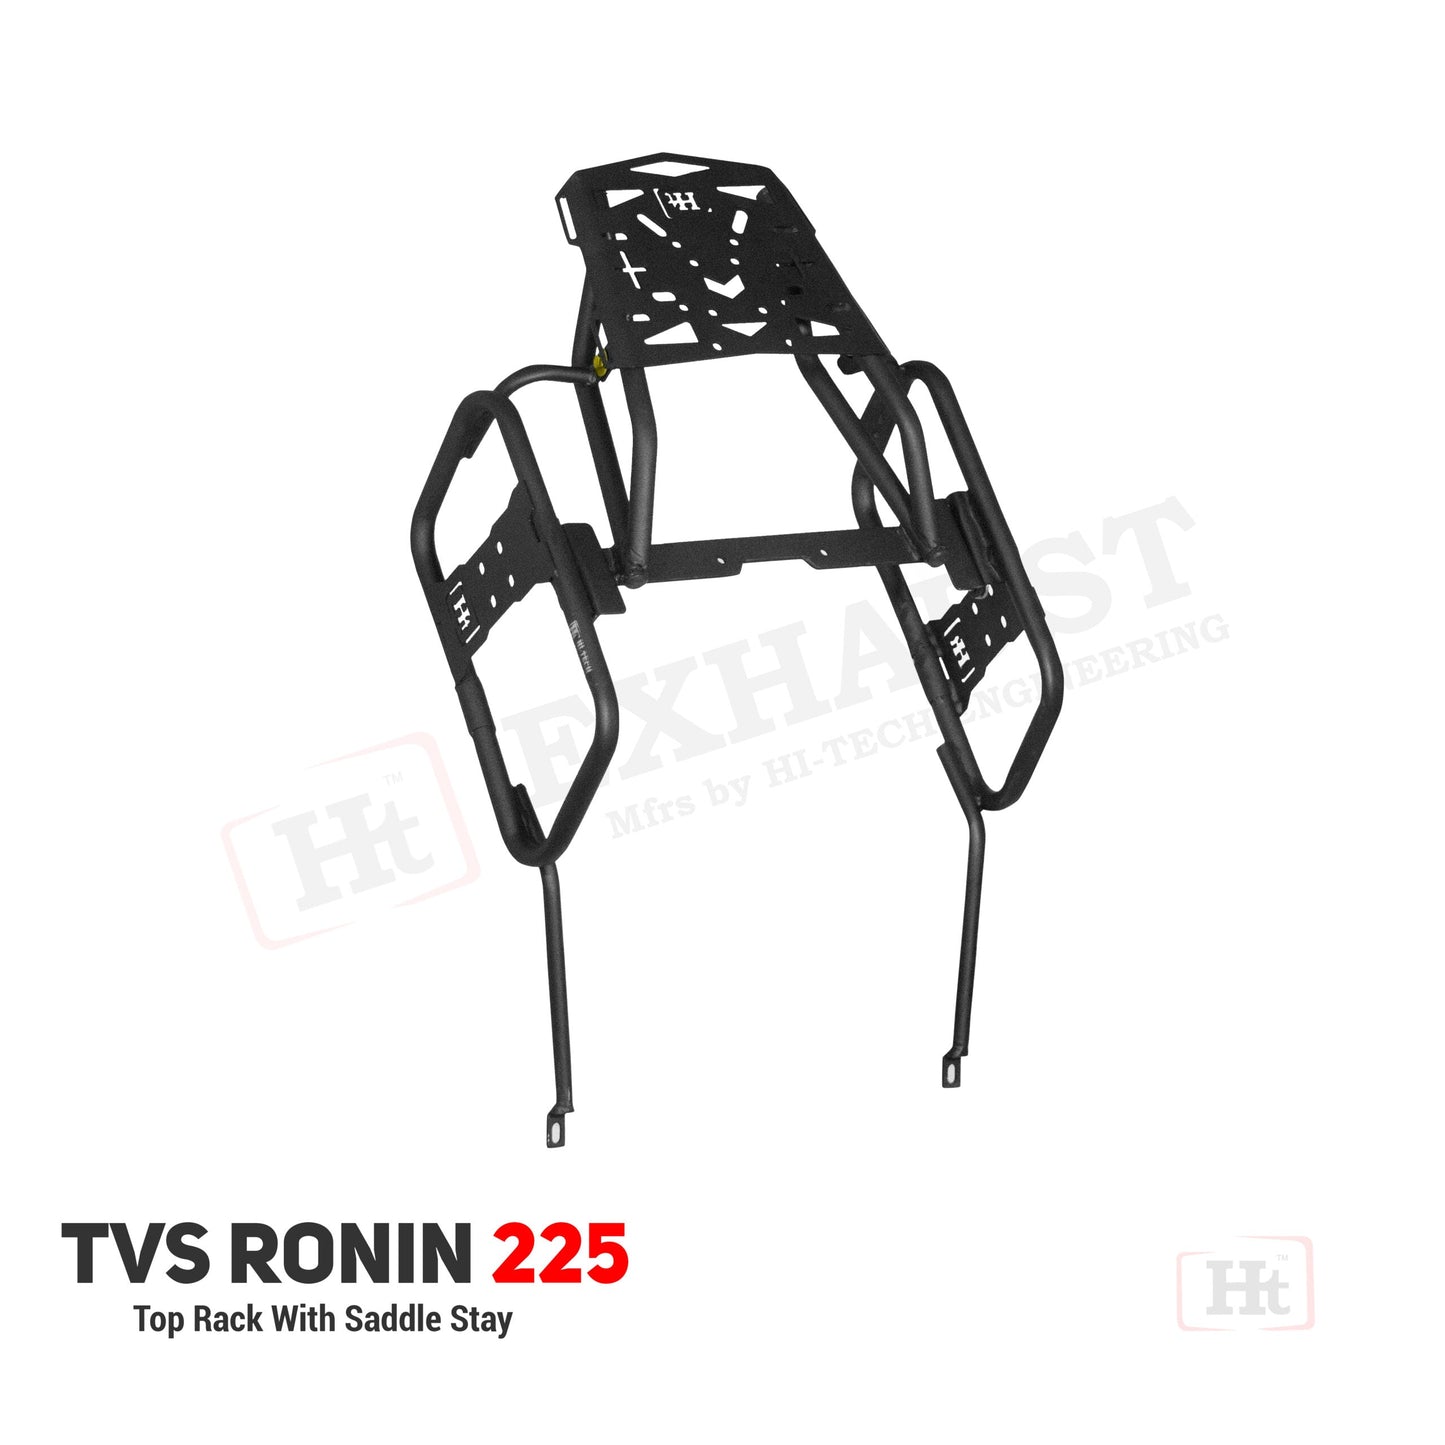 Top Rack With saddle stay For TVS RONIN 225 – SBTVS-116/ Ht Exhaust